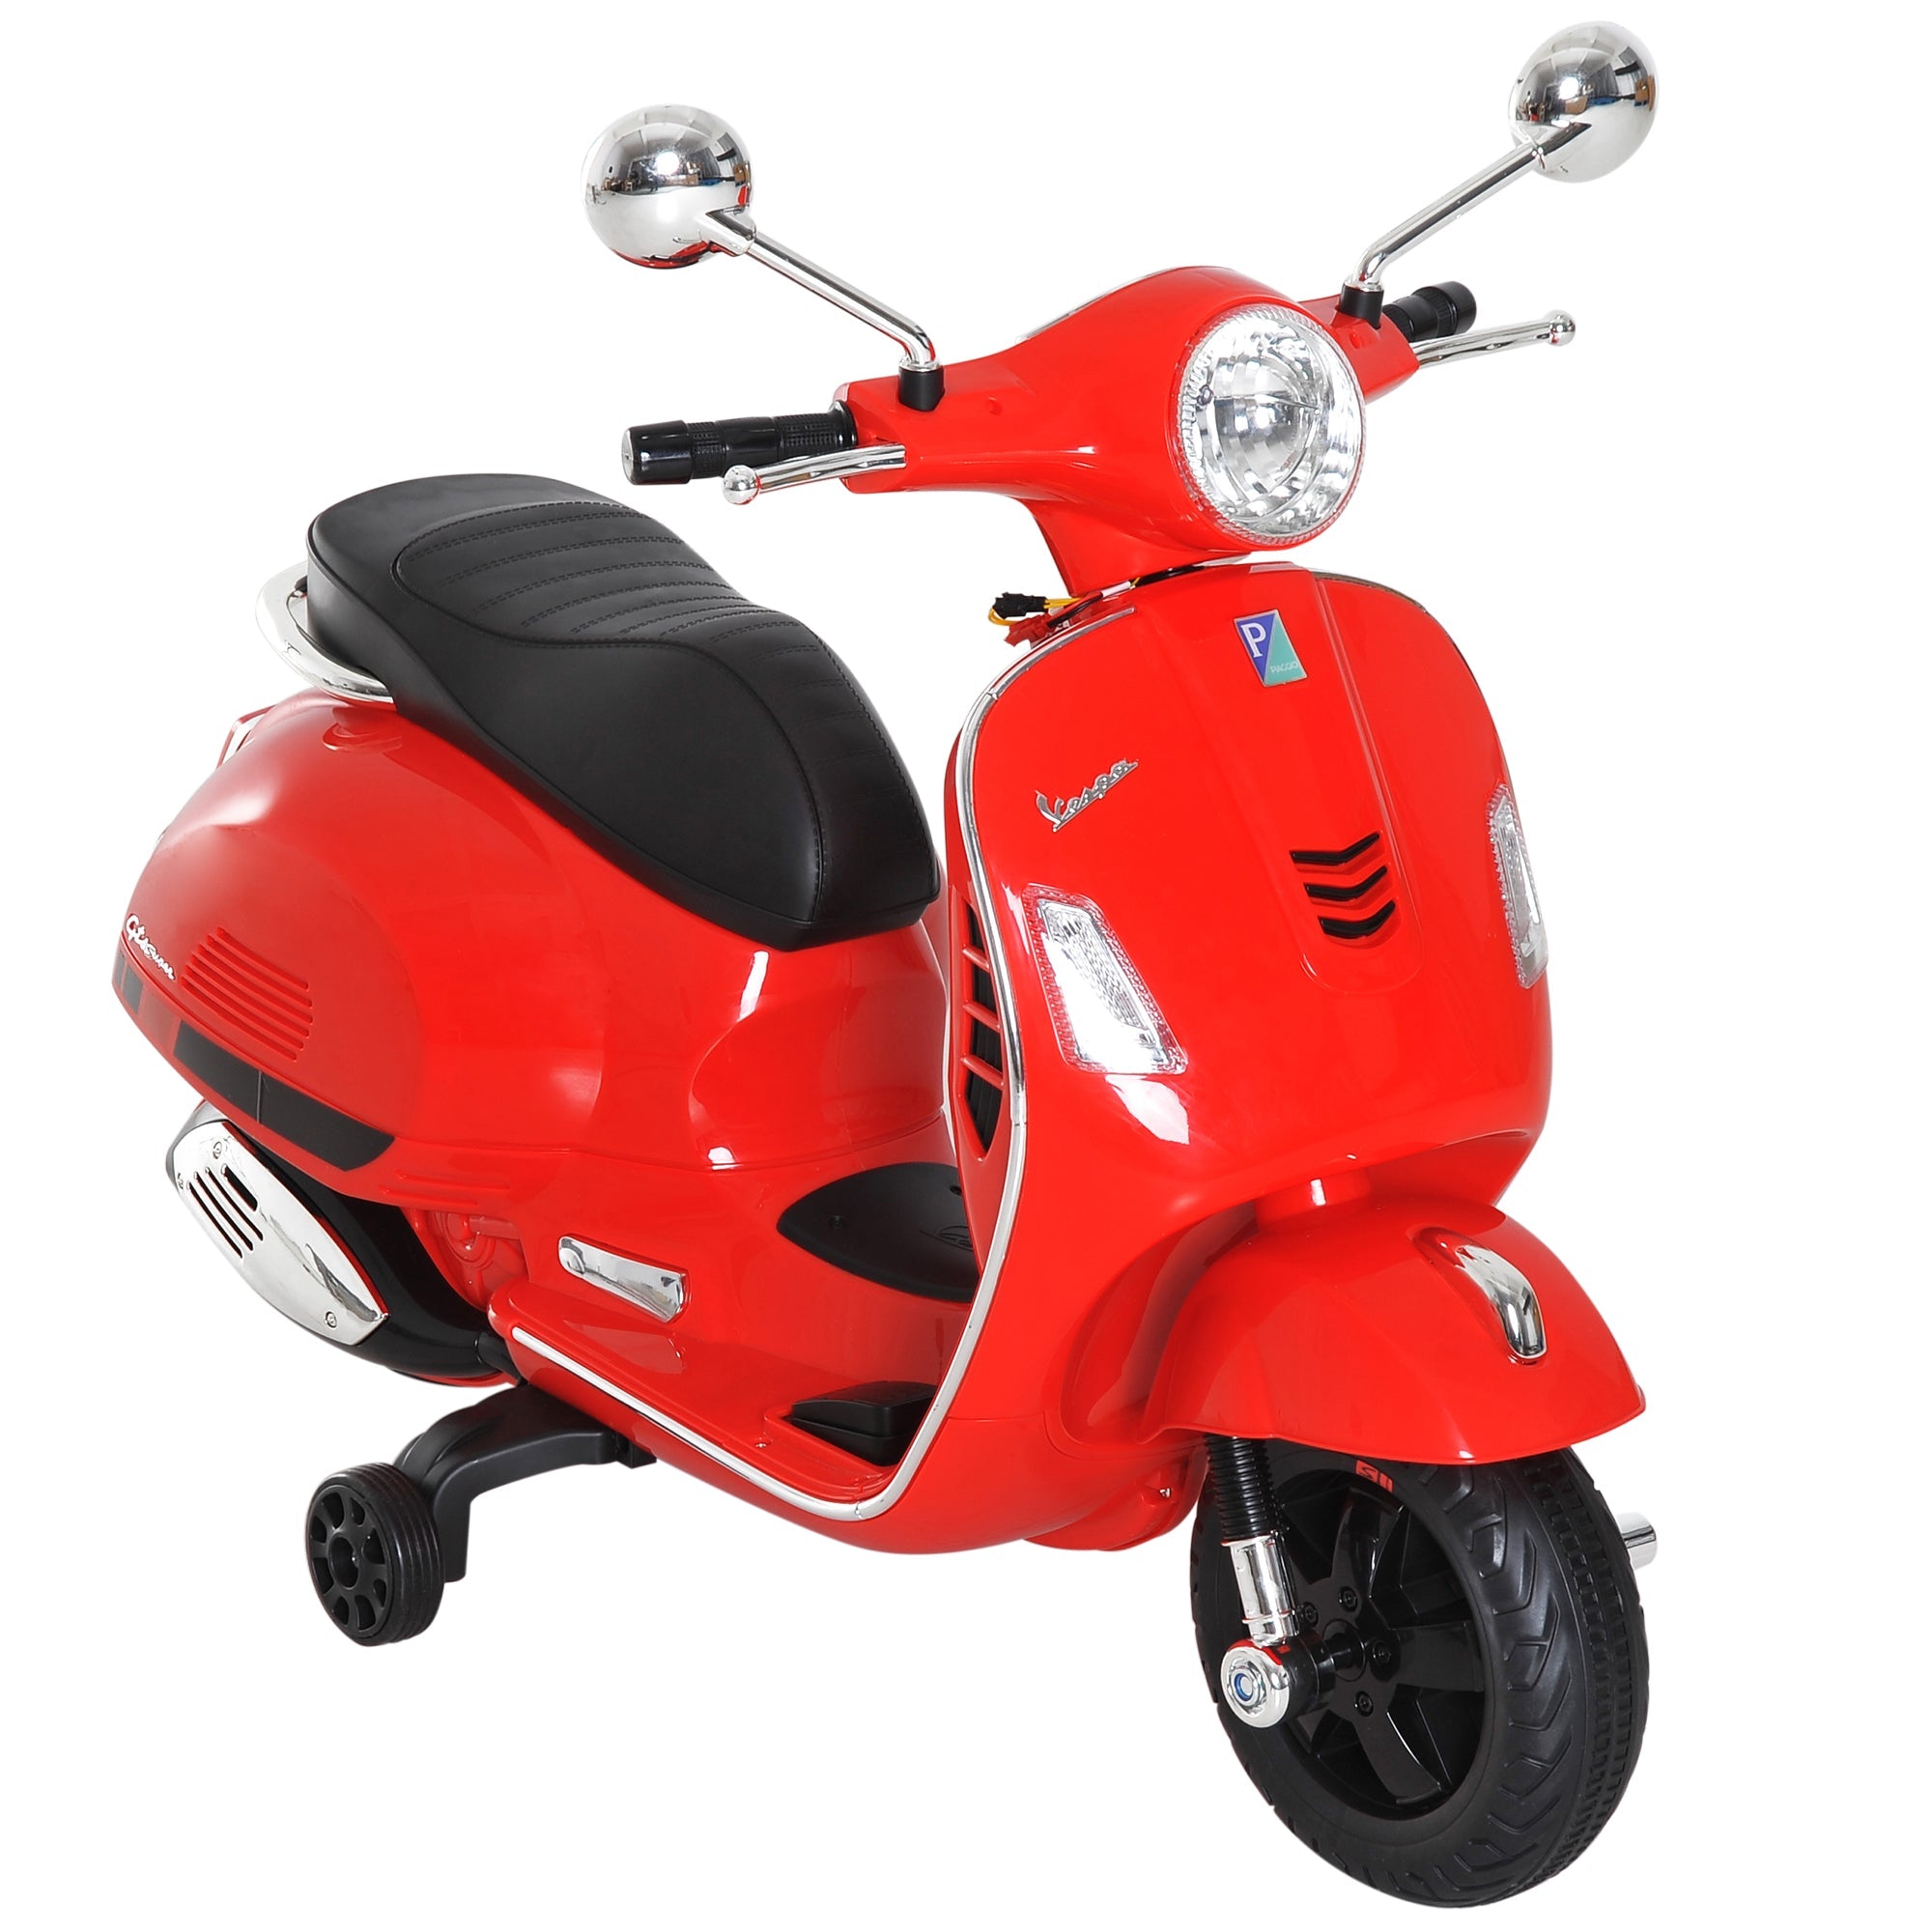 Maplin Plus Kids Ride On 6V Vespa Motorcycle with LED Lights (Red)